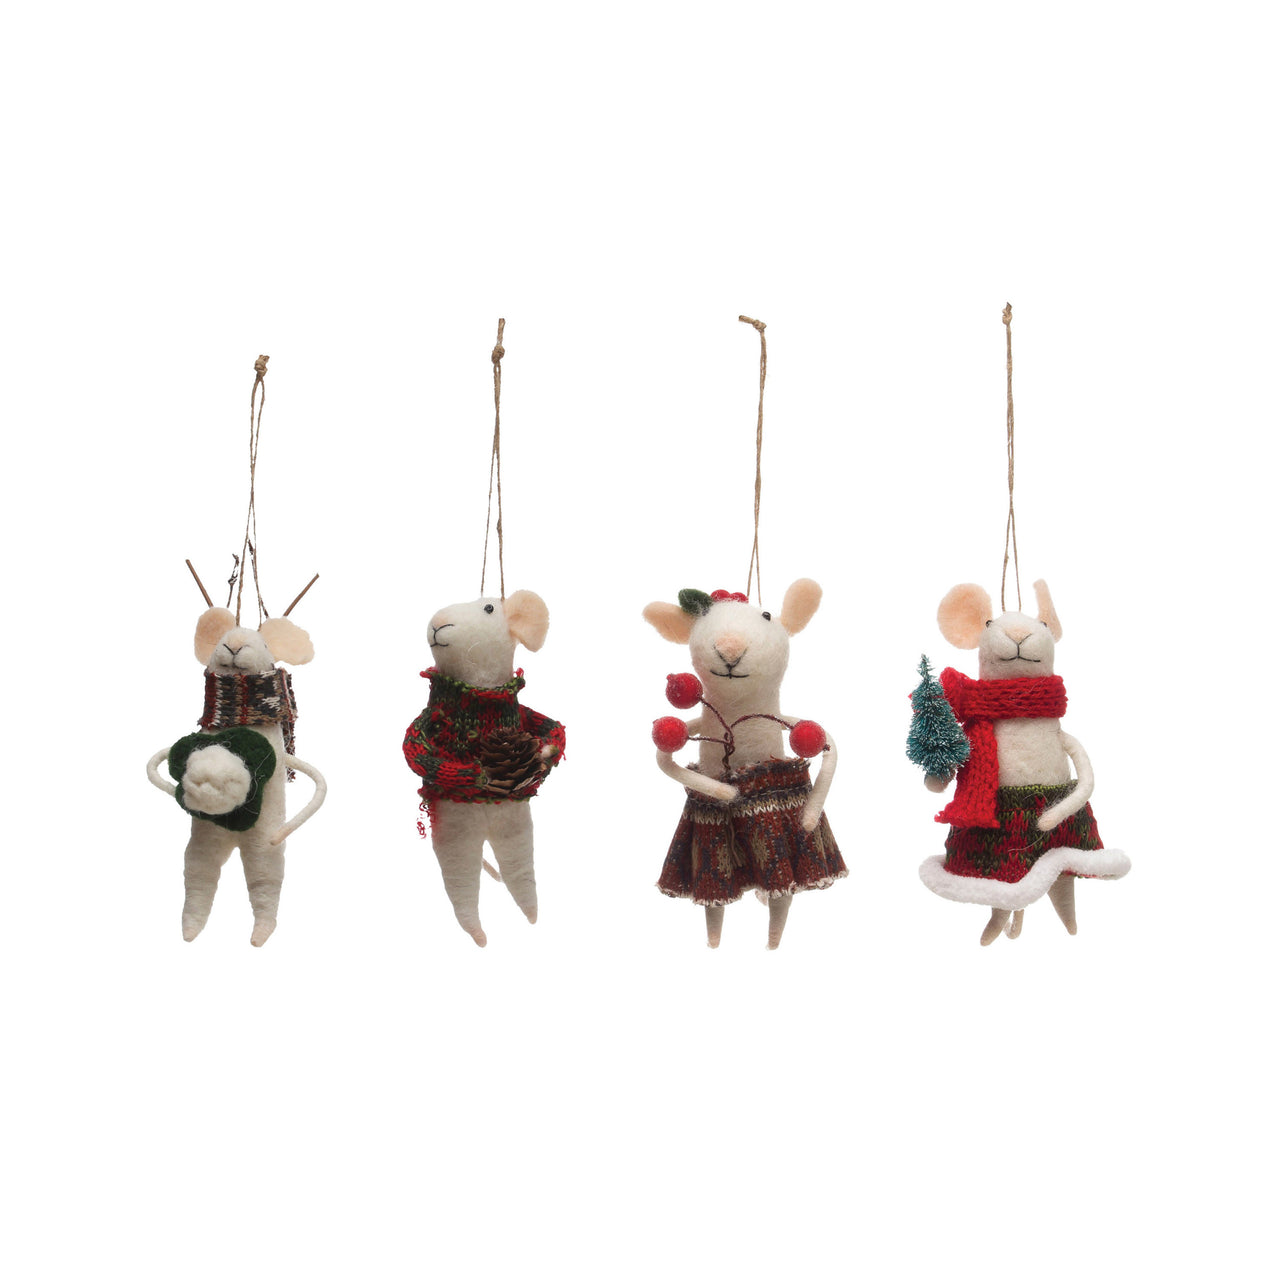 Wool Felt Mouse in Outfit Ornament